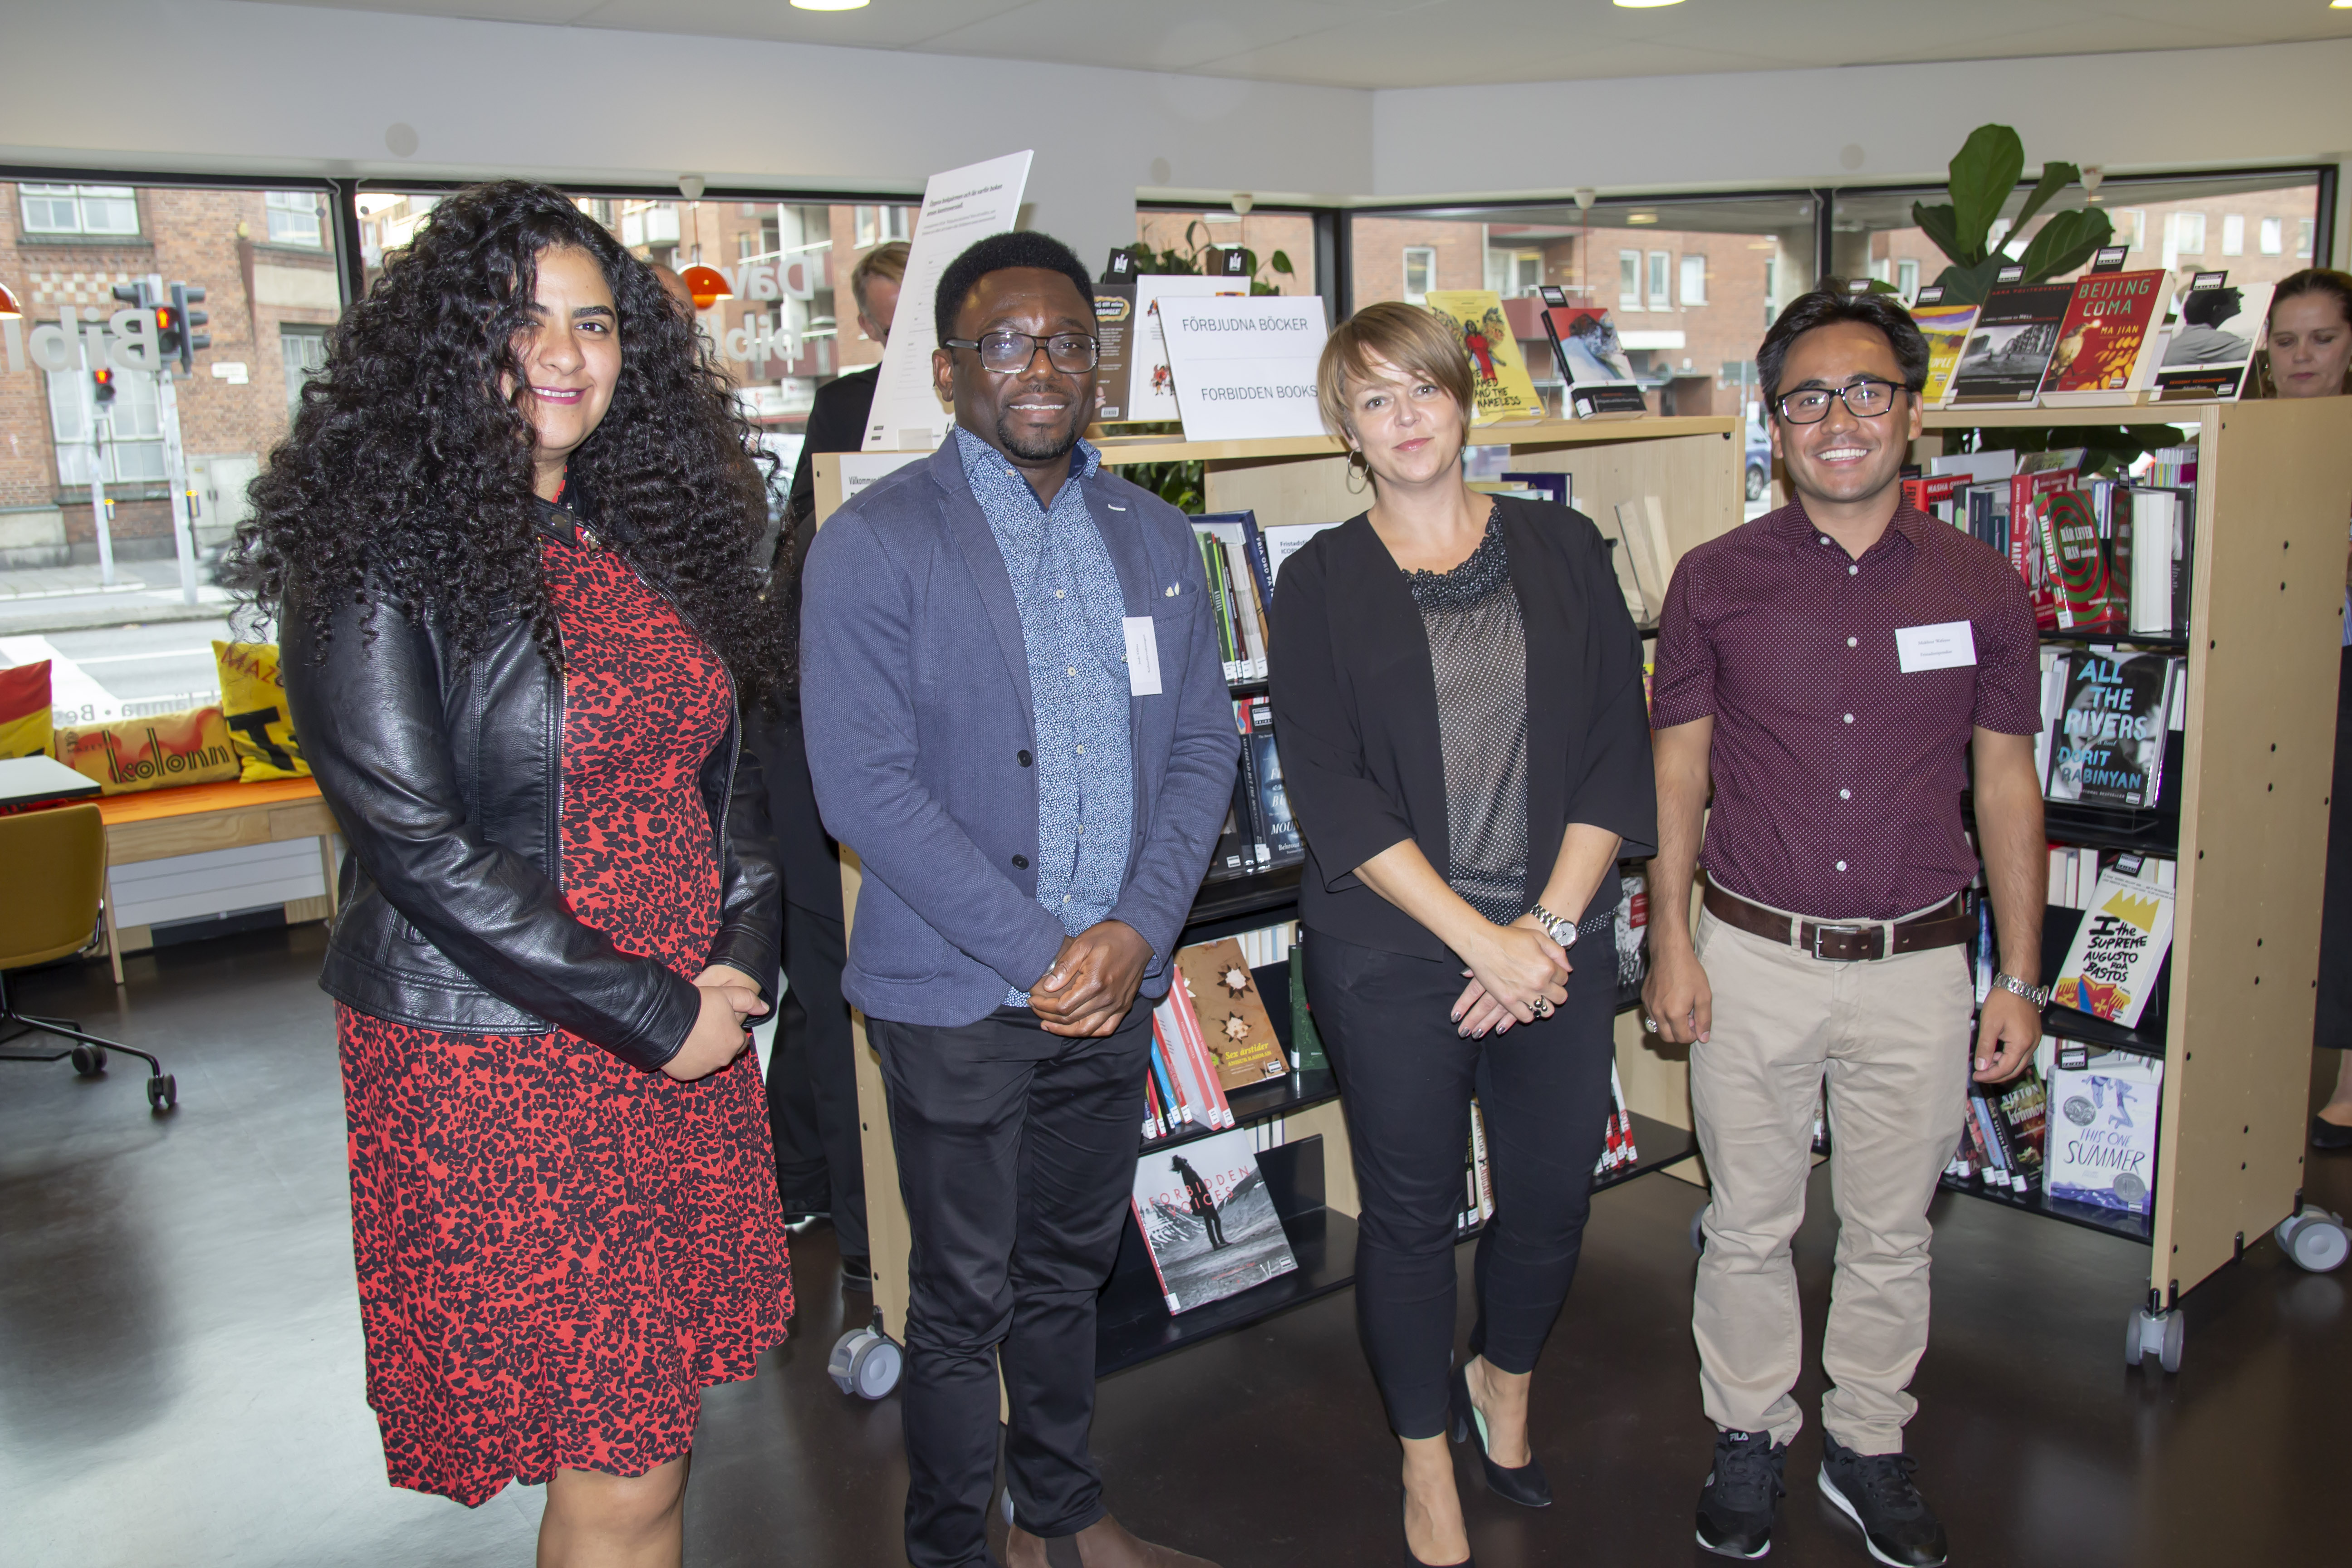 At the opening of the Dawit Isaak Library in Malmö, Sweden 15 September 2020. With three current and former ICORN resident, Yasmine El Baramny, Jude Dibia and Mukhtar Wafayee with Mayor of Malmö CIty, Katrin Stjernfeldt Jammeh. Photo.